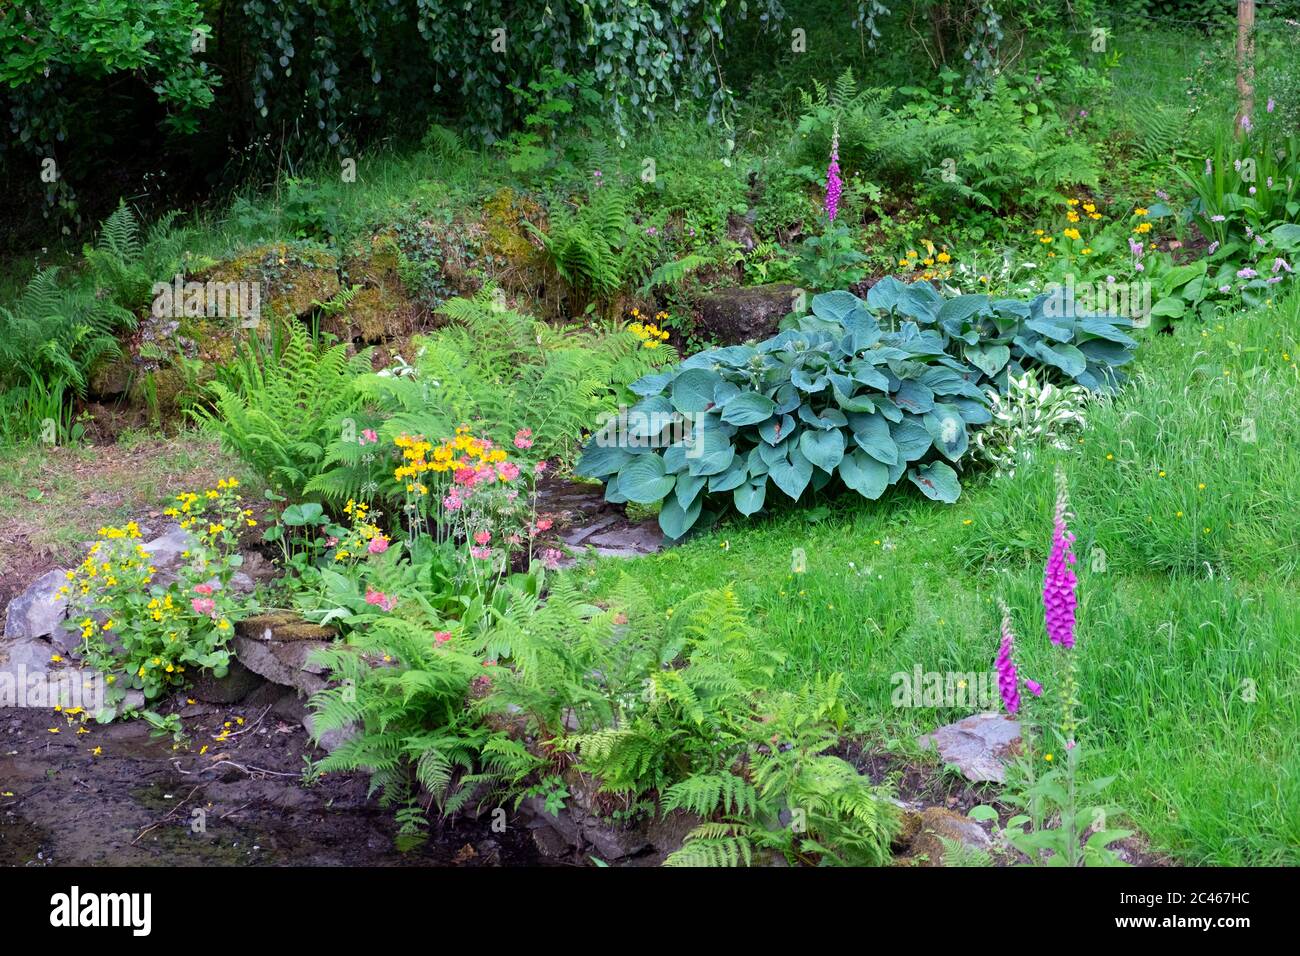 View of Hosta, candelabra primroses, foxgloves, ferns, plants growing in a shady damp area of country garden in Carmarthenshire Wales UK. KATHY DEWITT Stock Photo